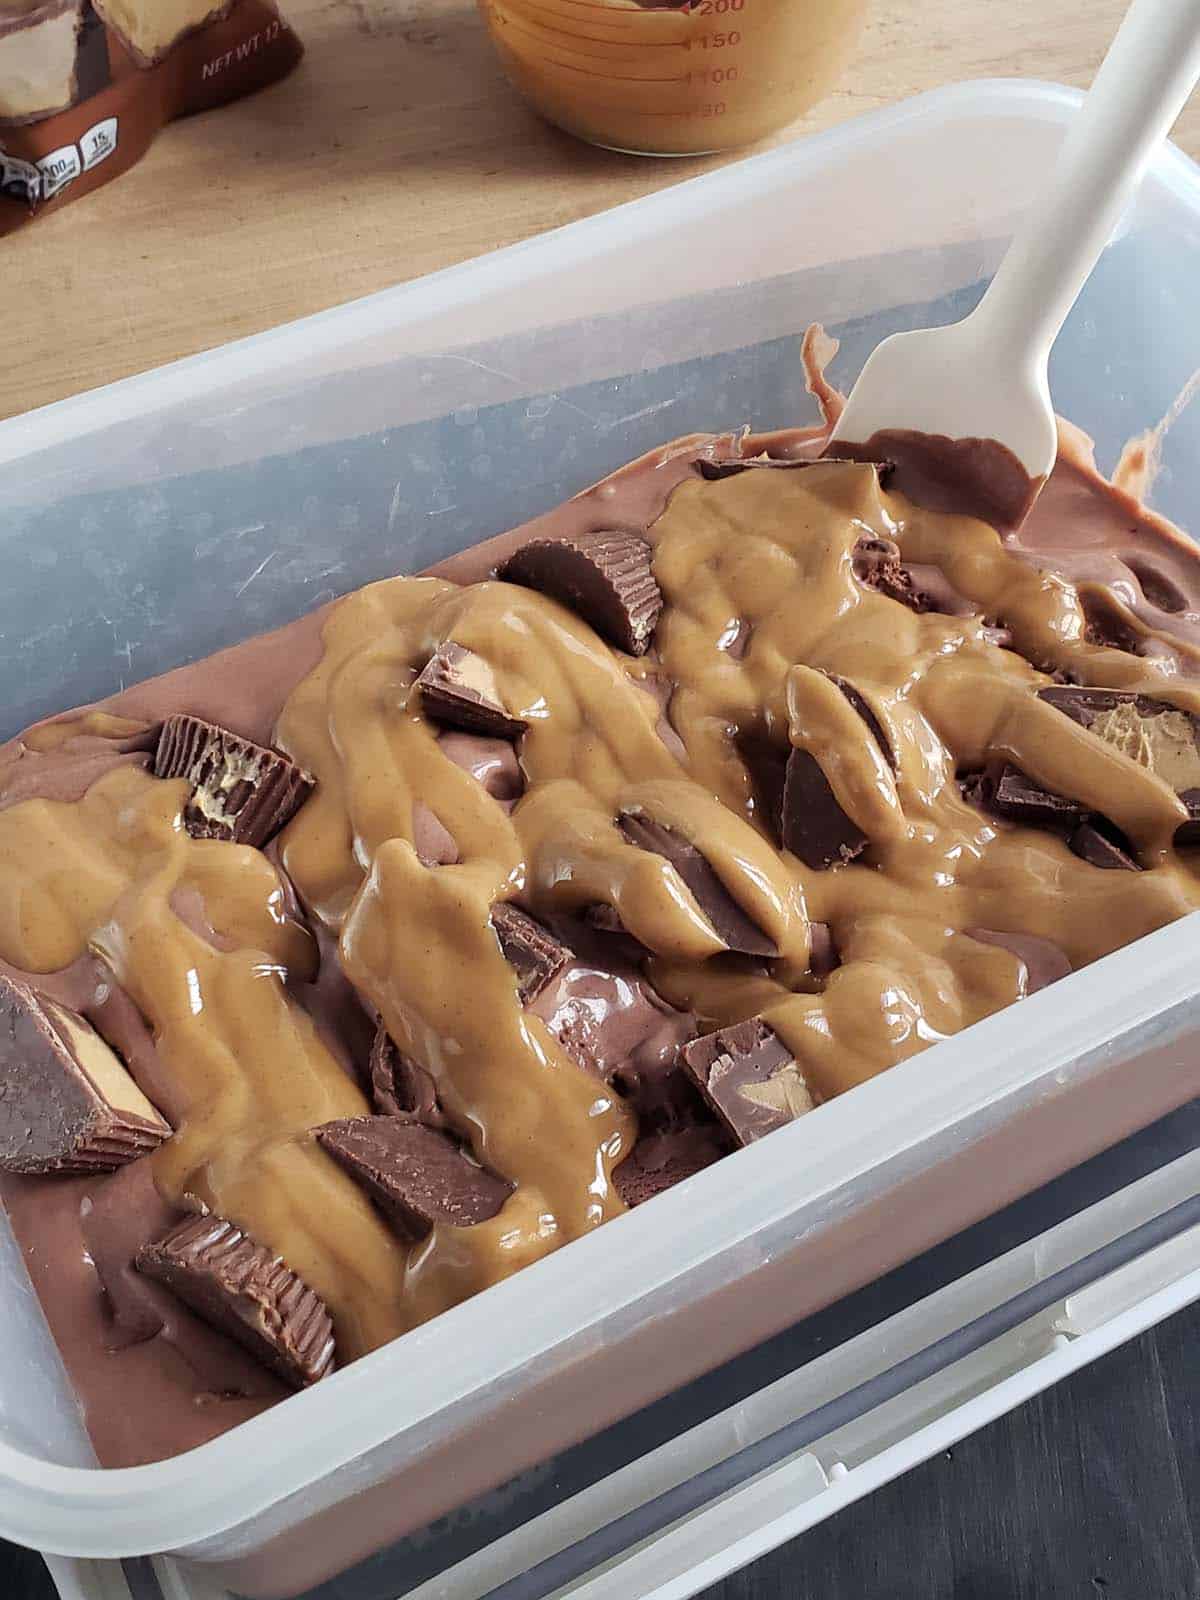 Chocolate ice cream with a peanut butter swirl in a clear plastic container.